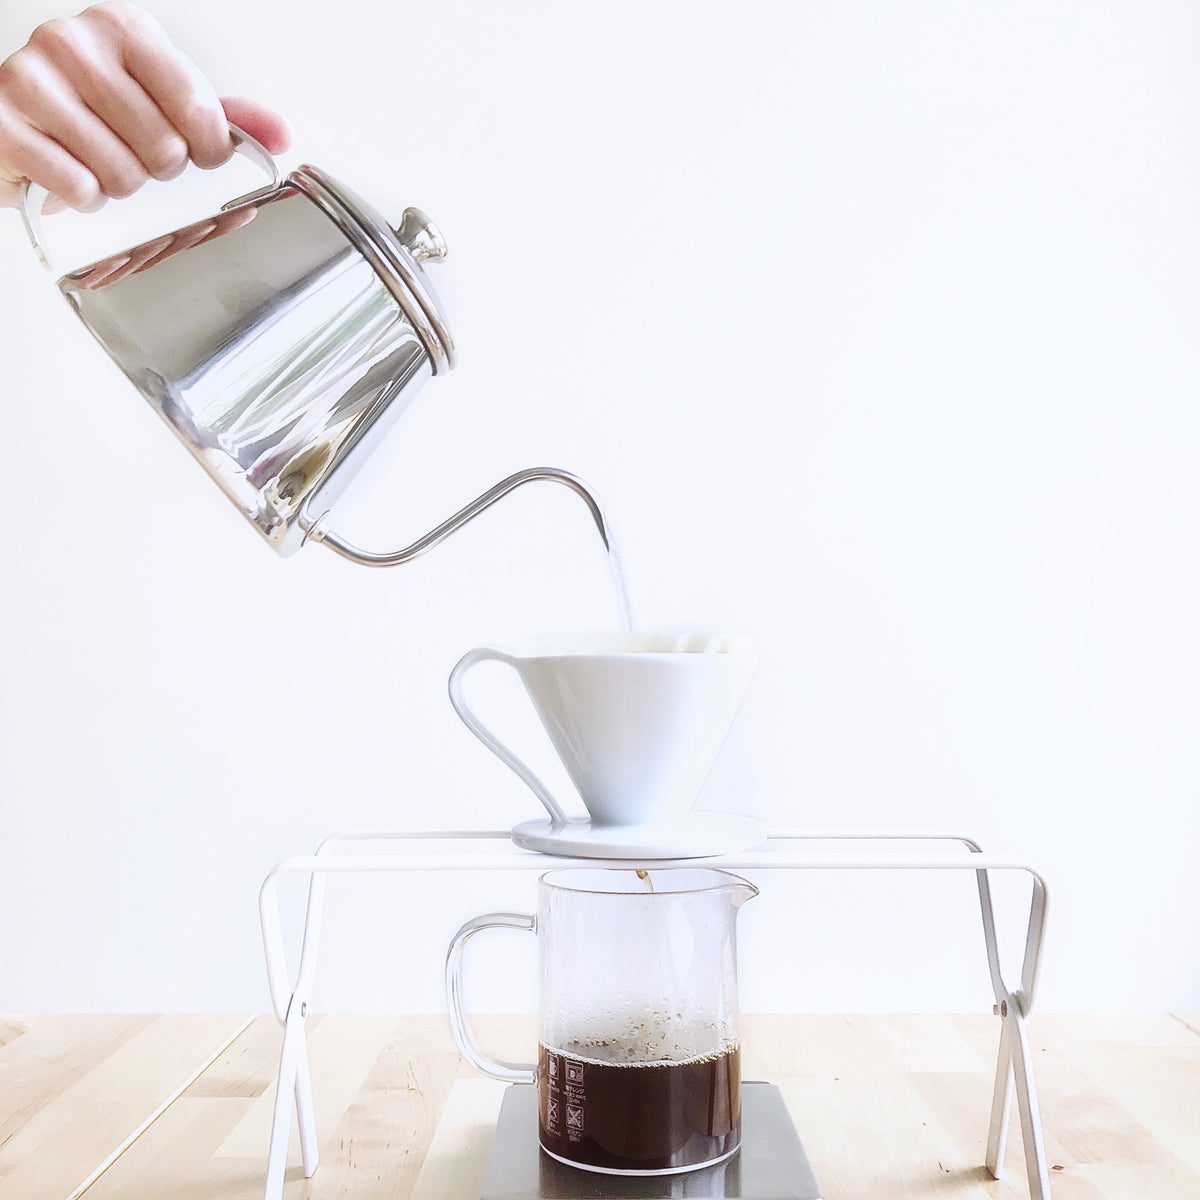 How to Brew Coffee At Home